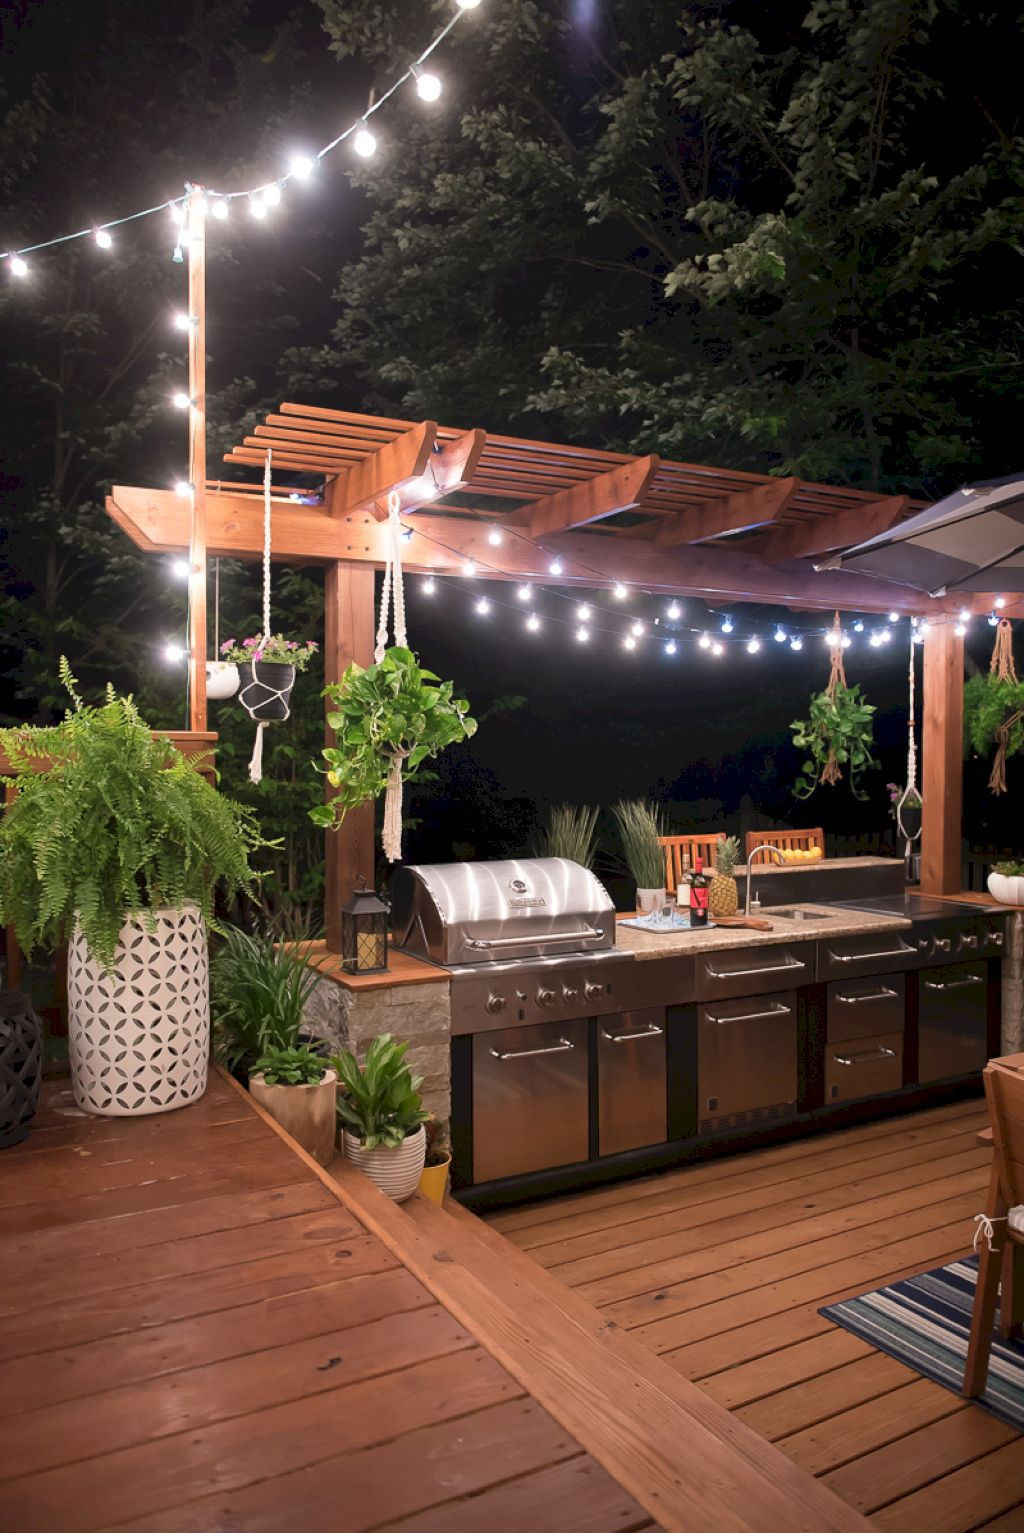 20 Inspirational Outdoor Patio Kitchen Ideas - Home Decoration and ...